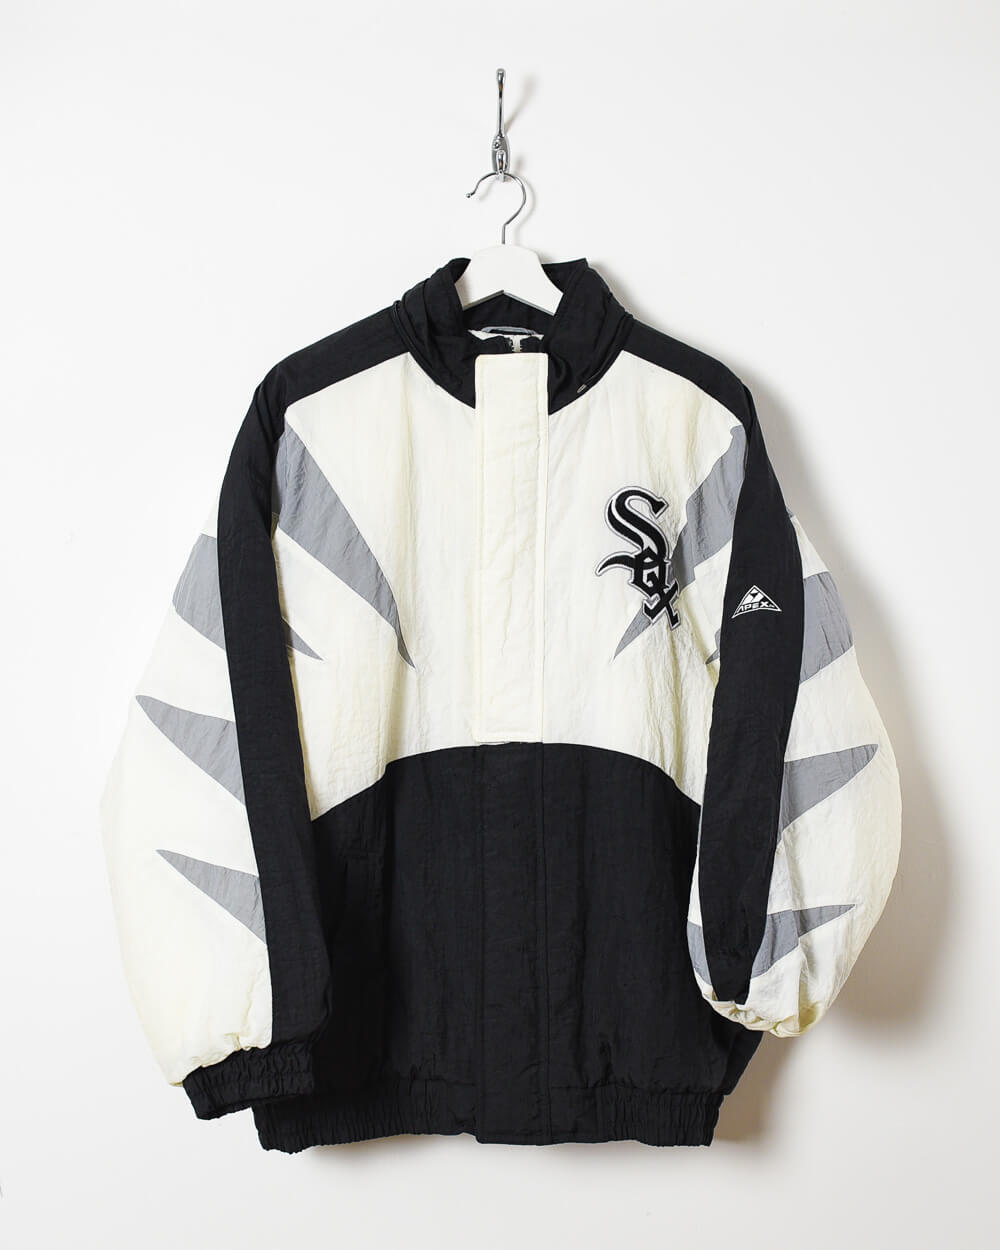 Chicago White Sox Two-Tone Reversible Fleece Hooded Jacket - Black/Grey Small